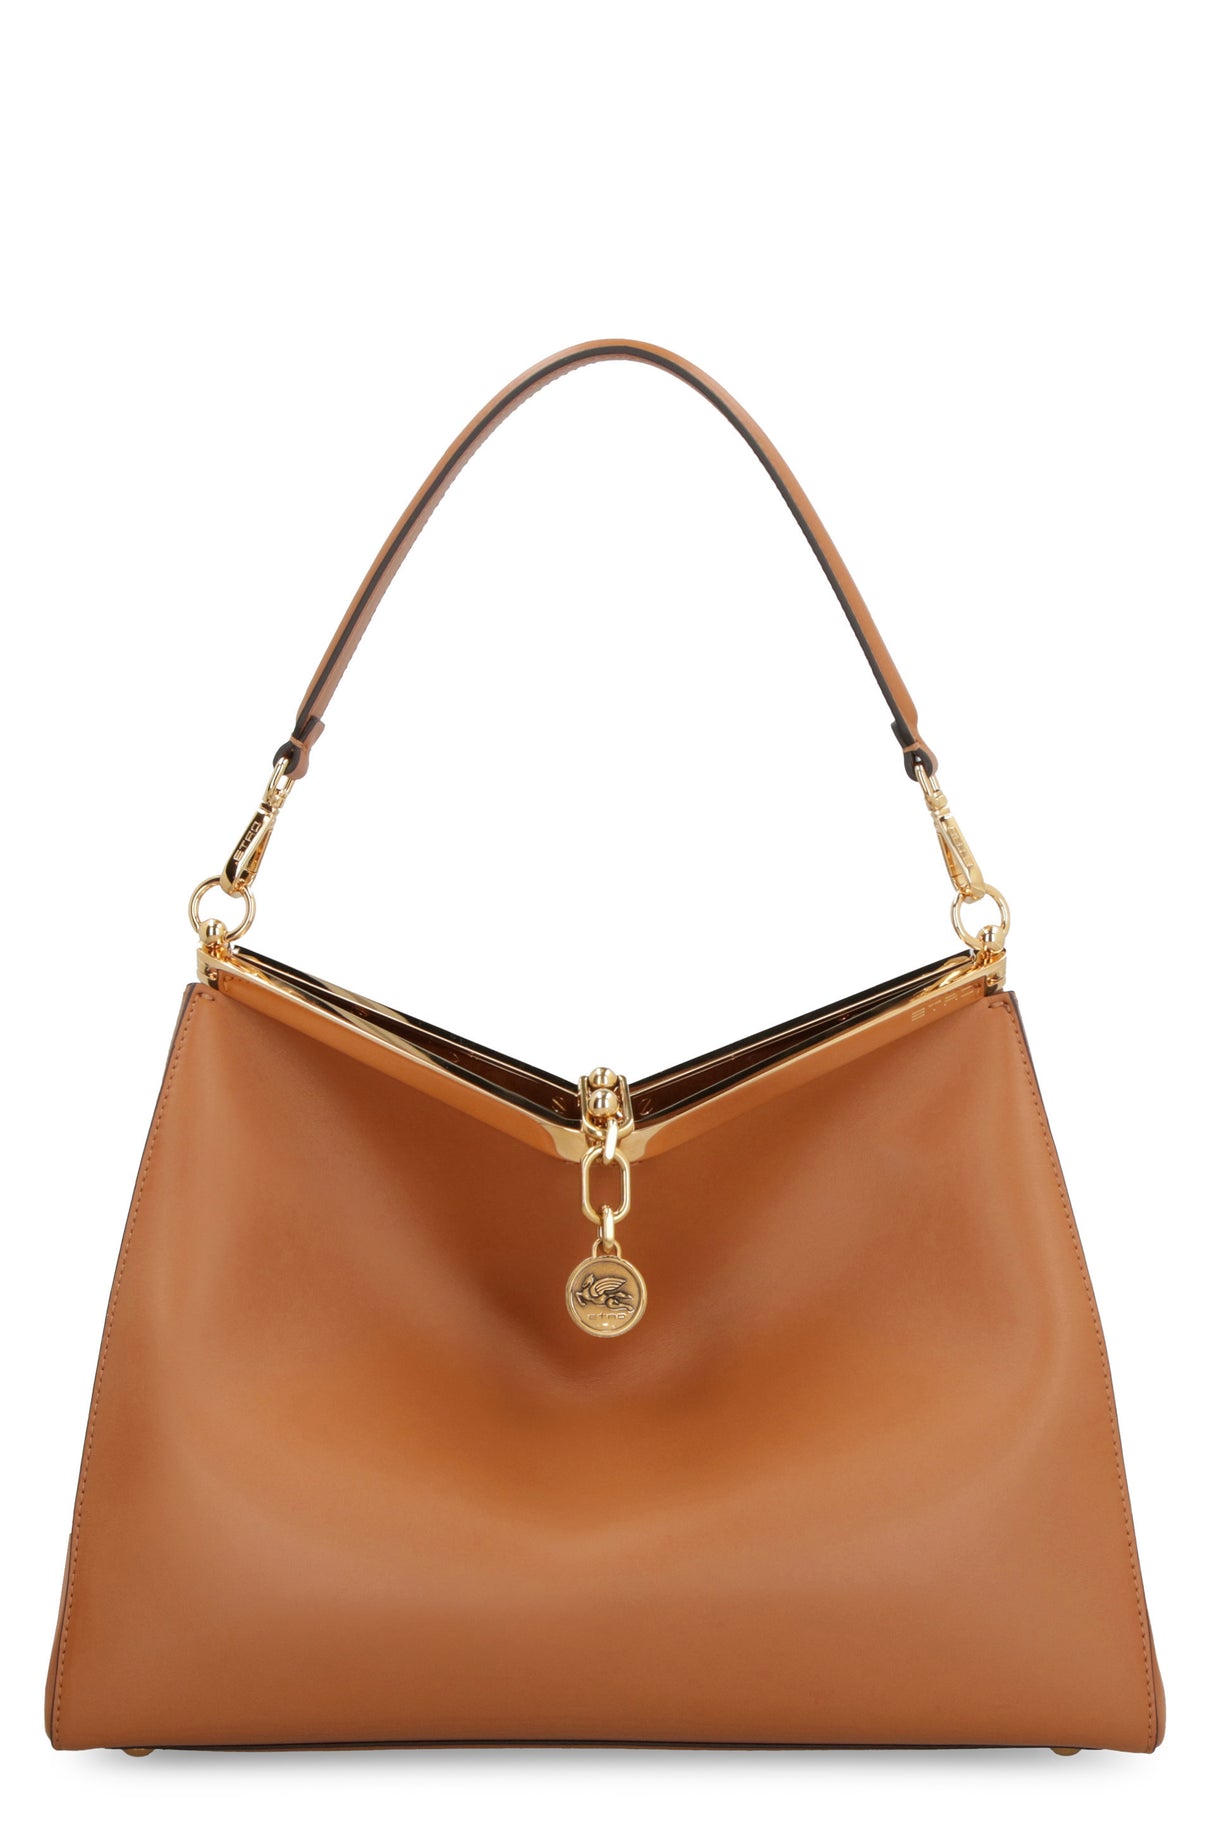 ETRO Saddle Brown Leather Shoulder Bag for Women - FW23 Collection